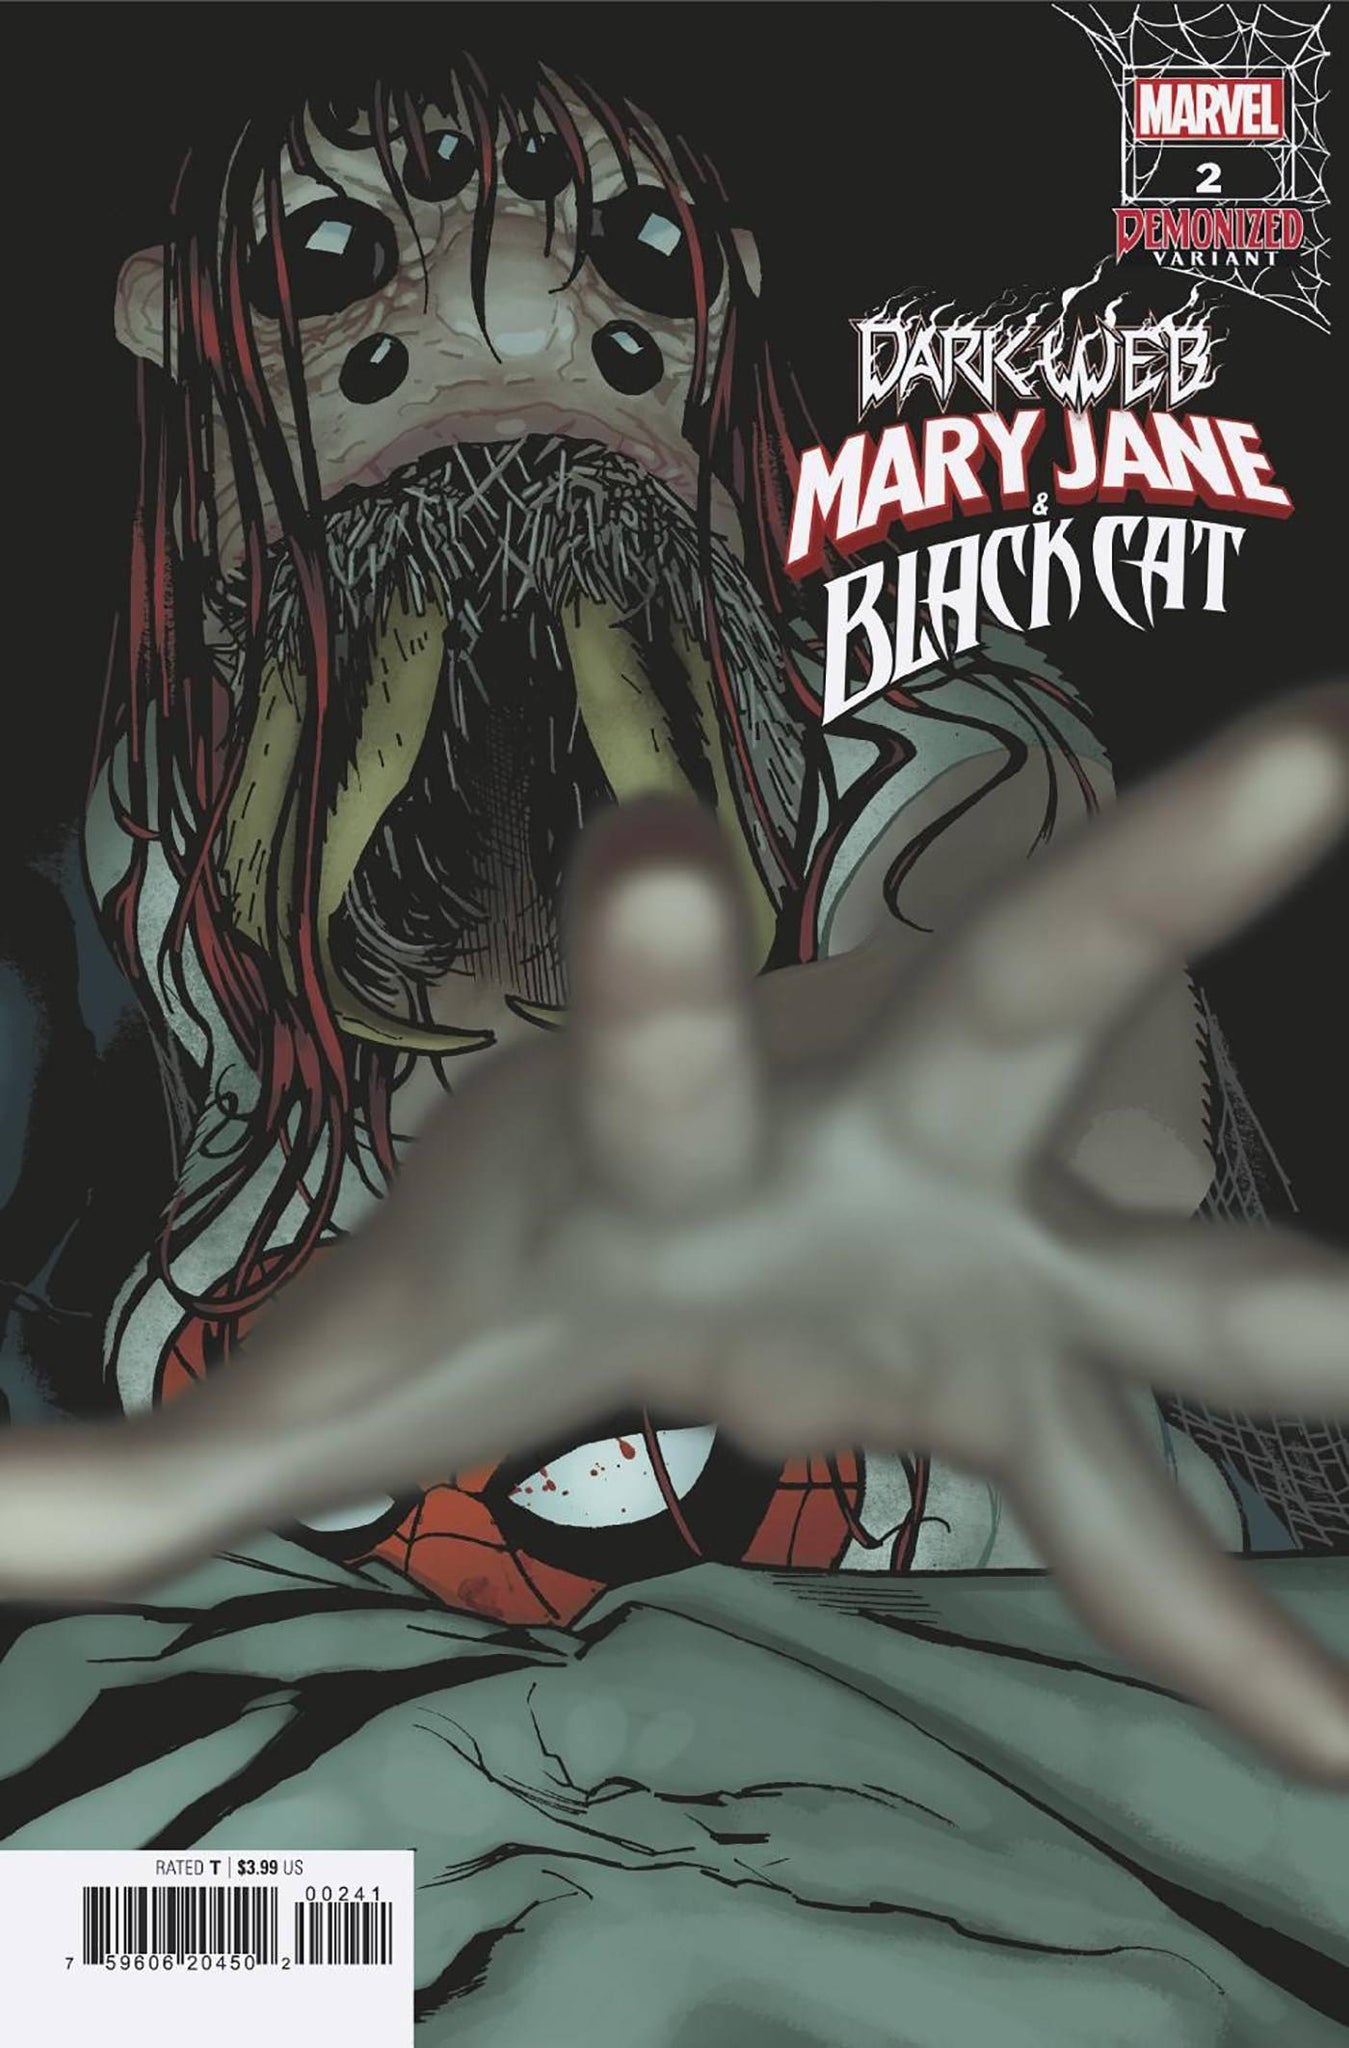 MARY JANE AND BLACK CAT #2 (OF 5)